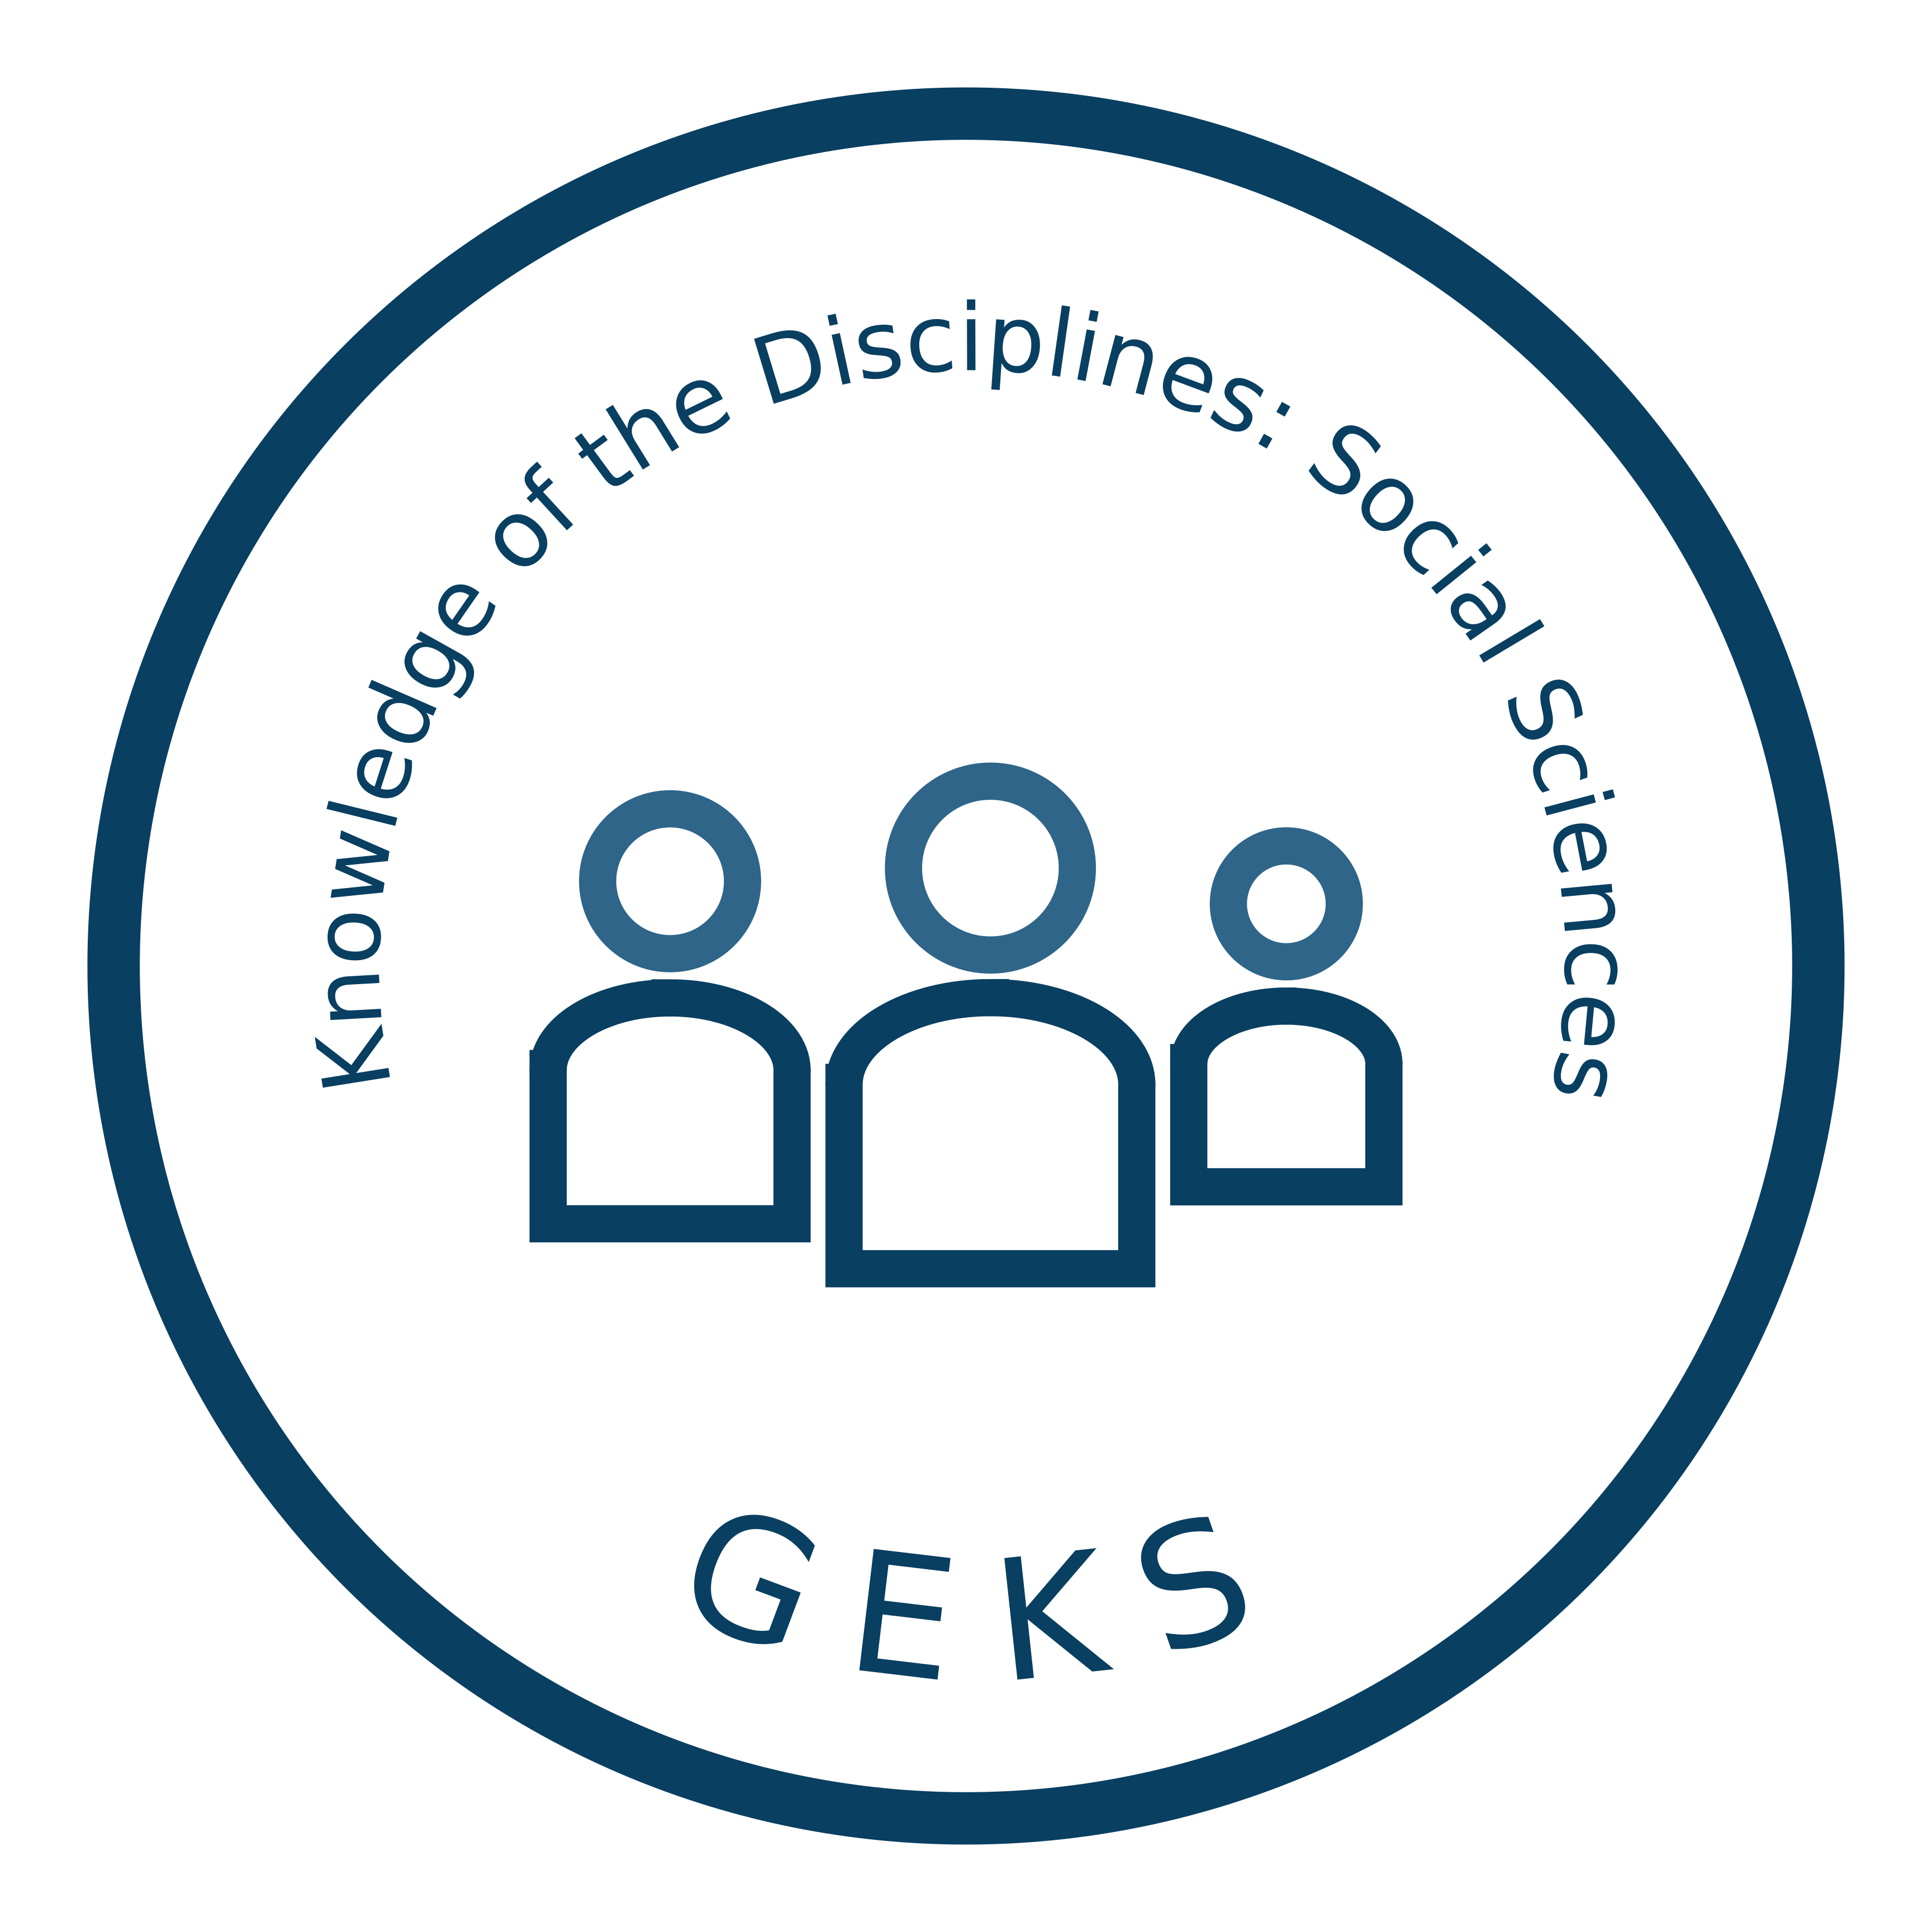 "Knowledge of the Disciplines: Social Sciences" above three human figures with "GEKS" below.